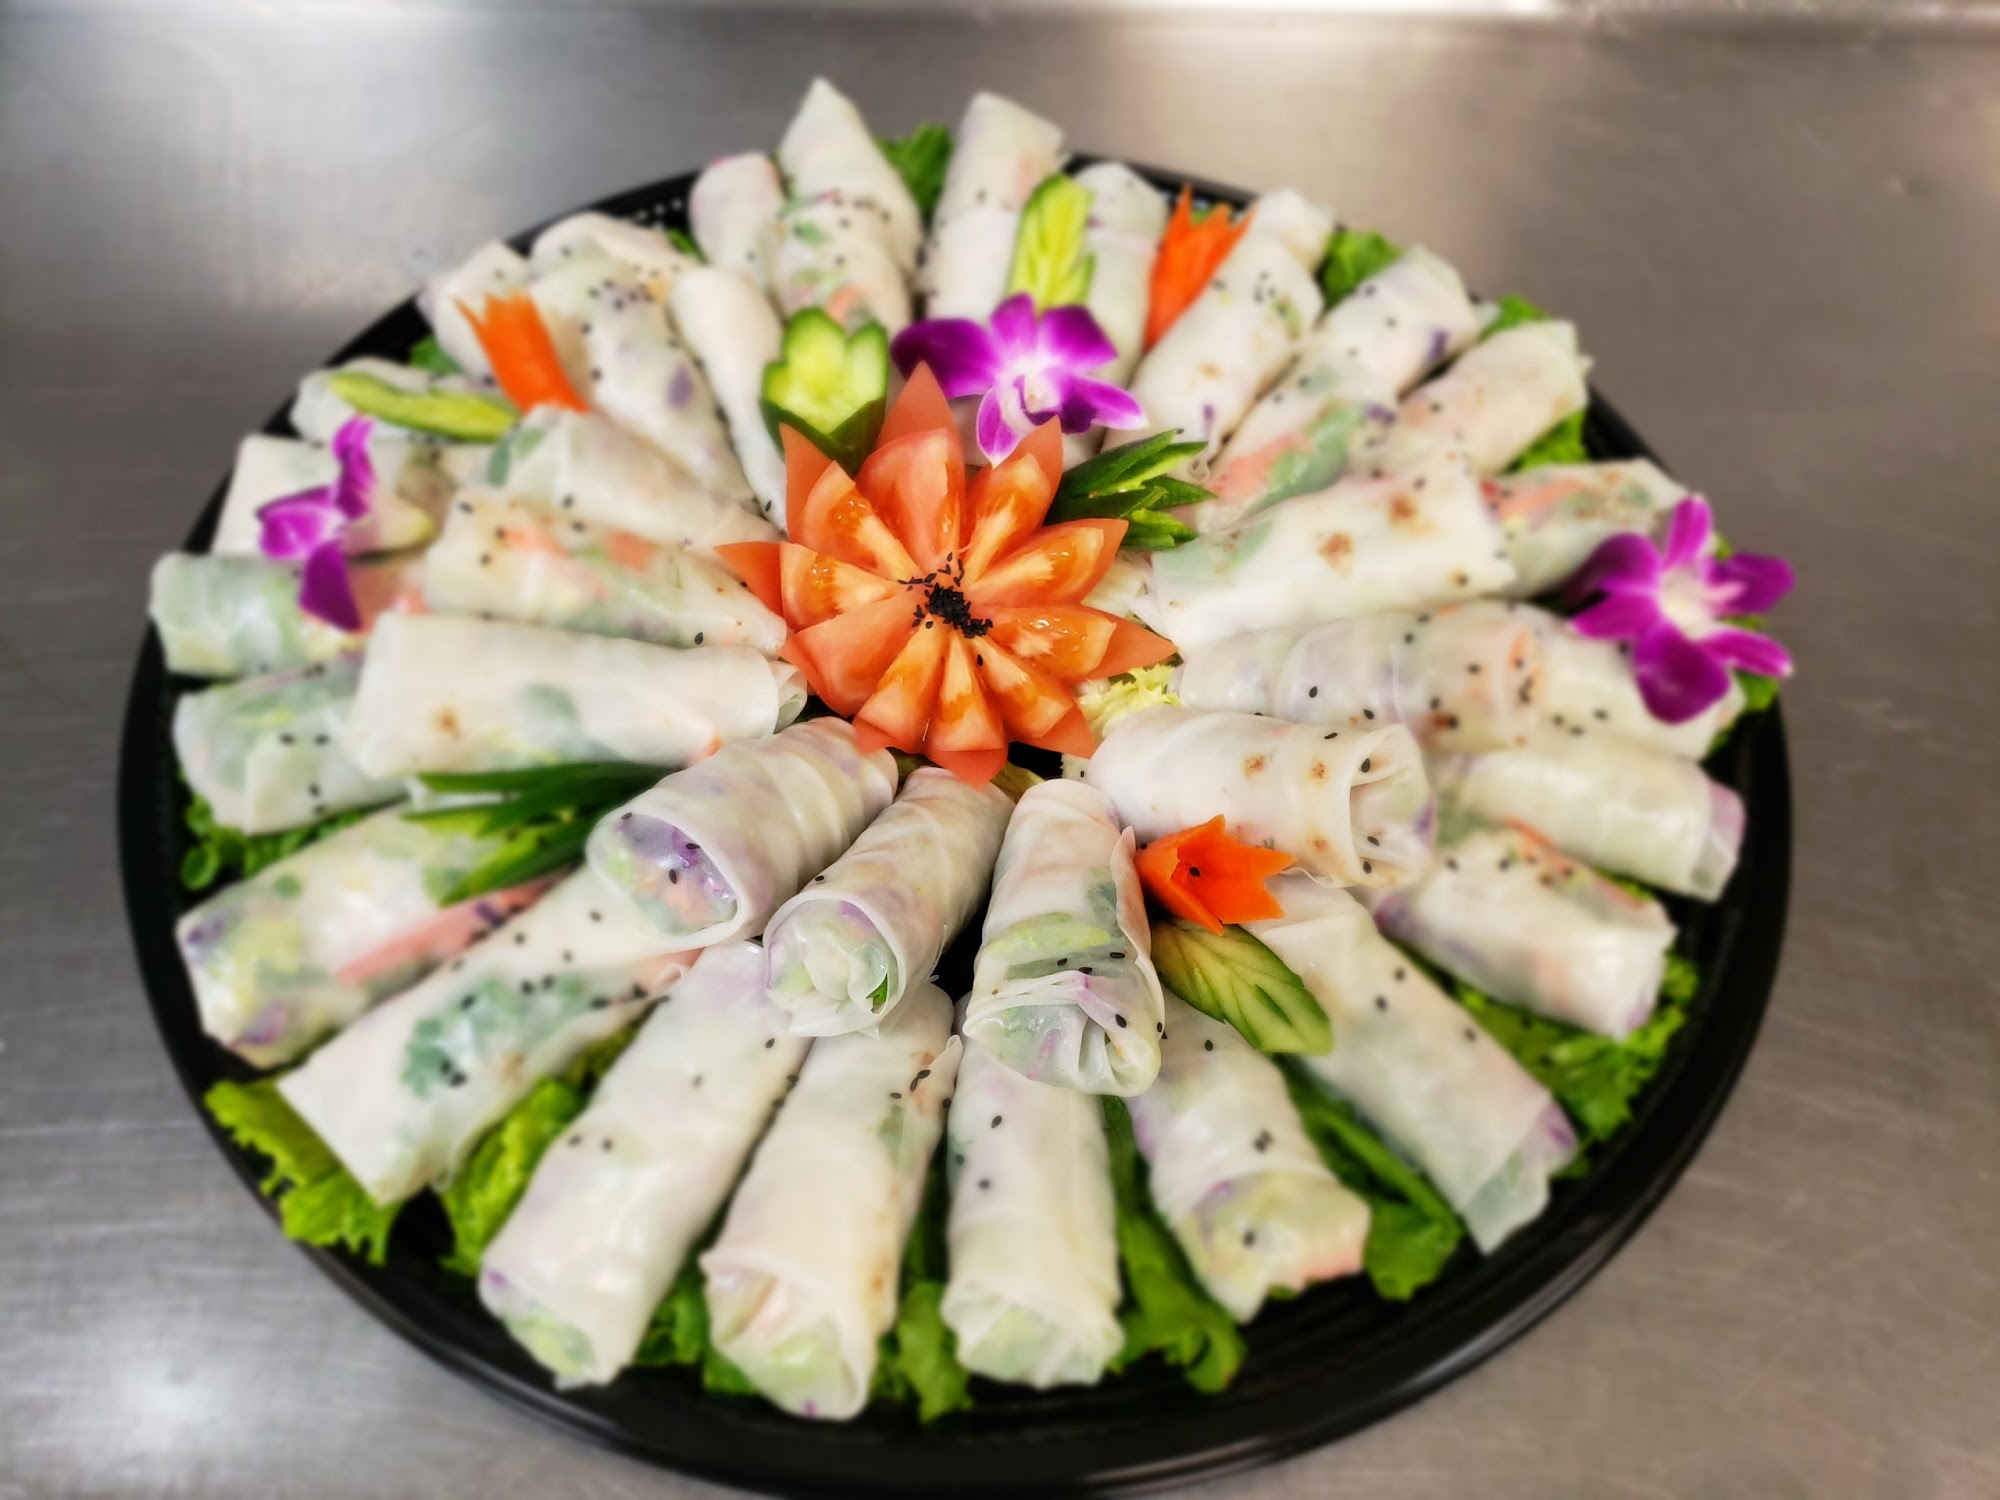 California's Best Catering & Events